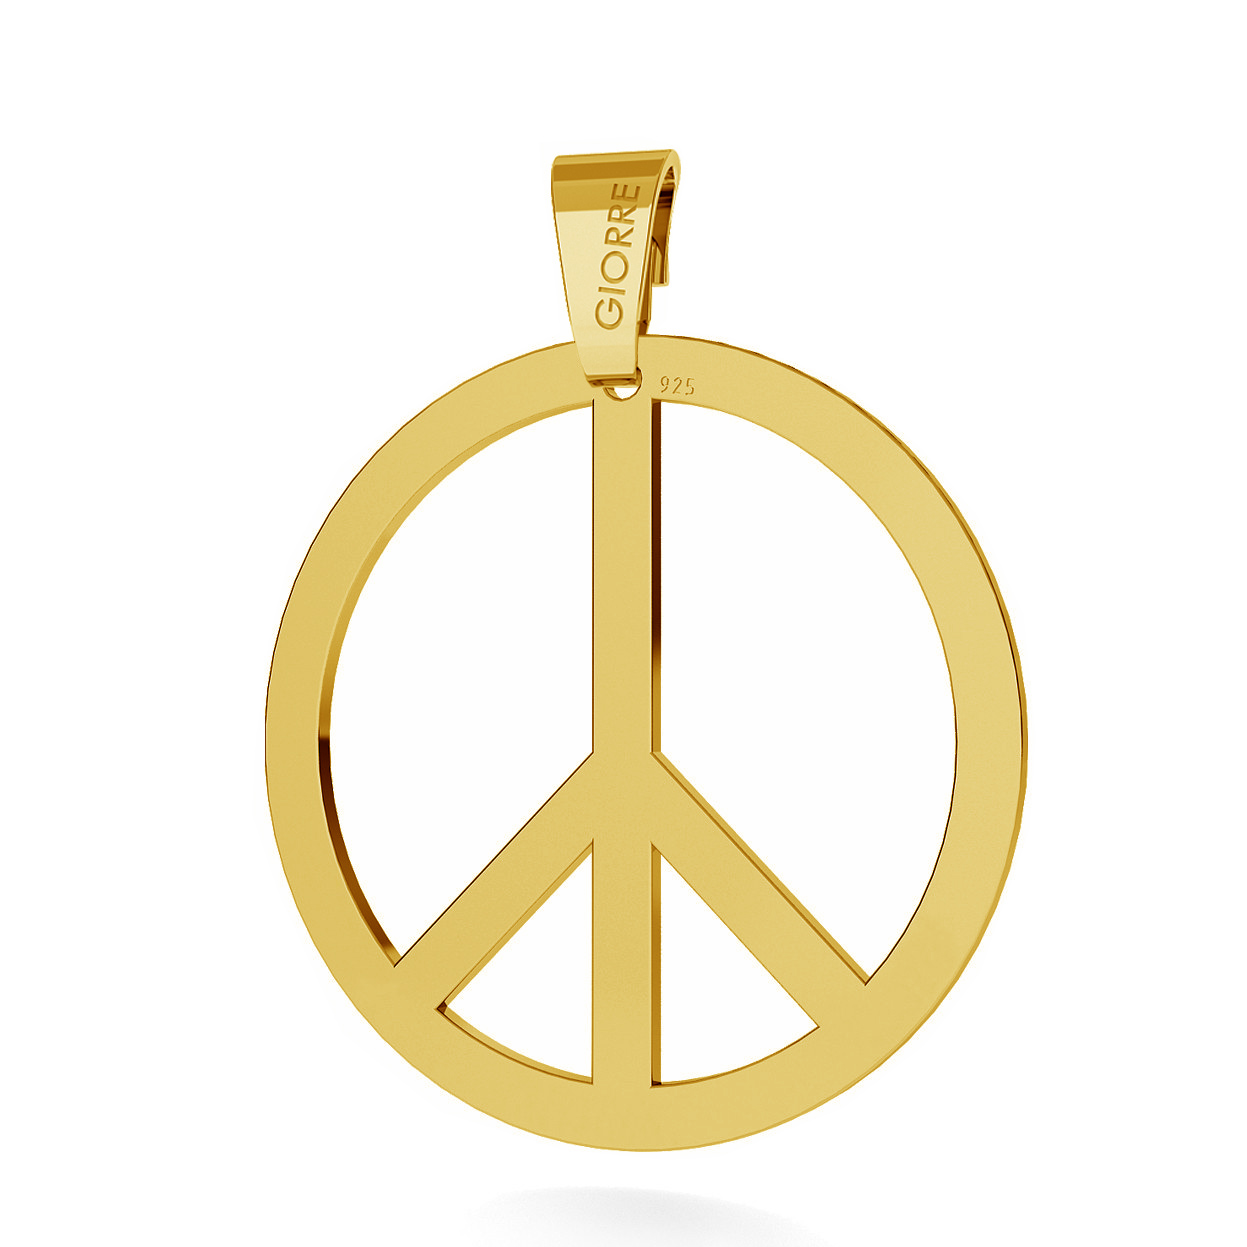 CHARM 126, PEACE SYMBOL WITH ENGRAVE, STERLING SILVER (925) RHODIUM OR GOLD PLATED